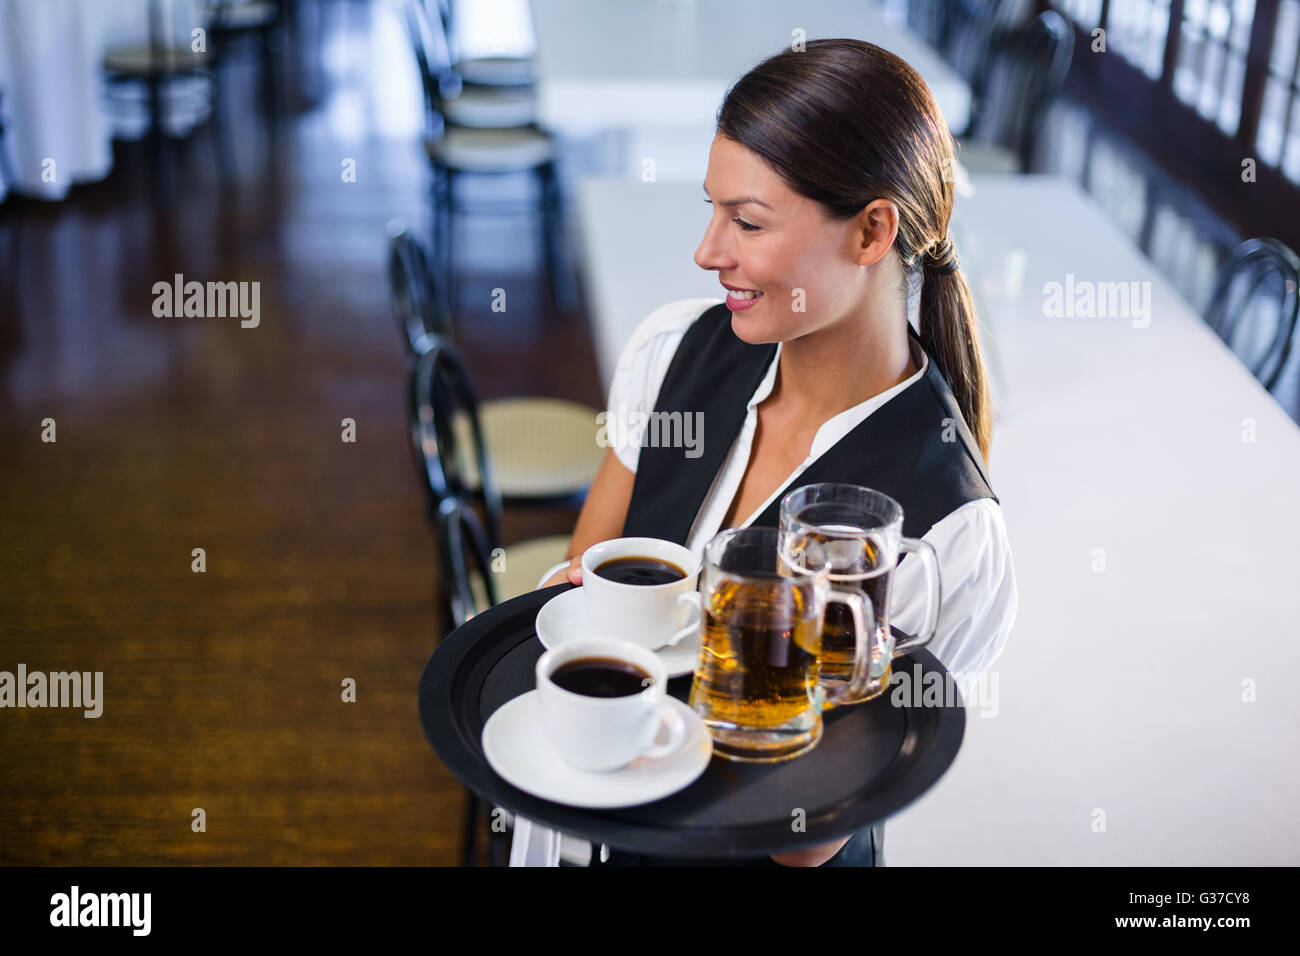 Waitress holding serving tray with coffee cup and pint of beer Stock Photo